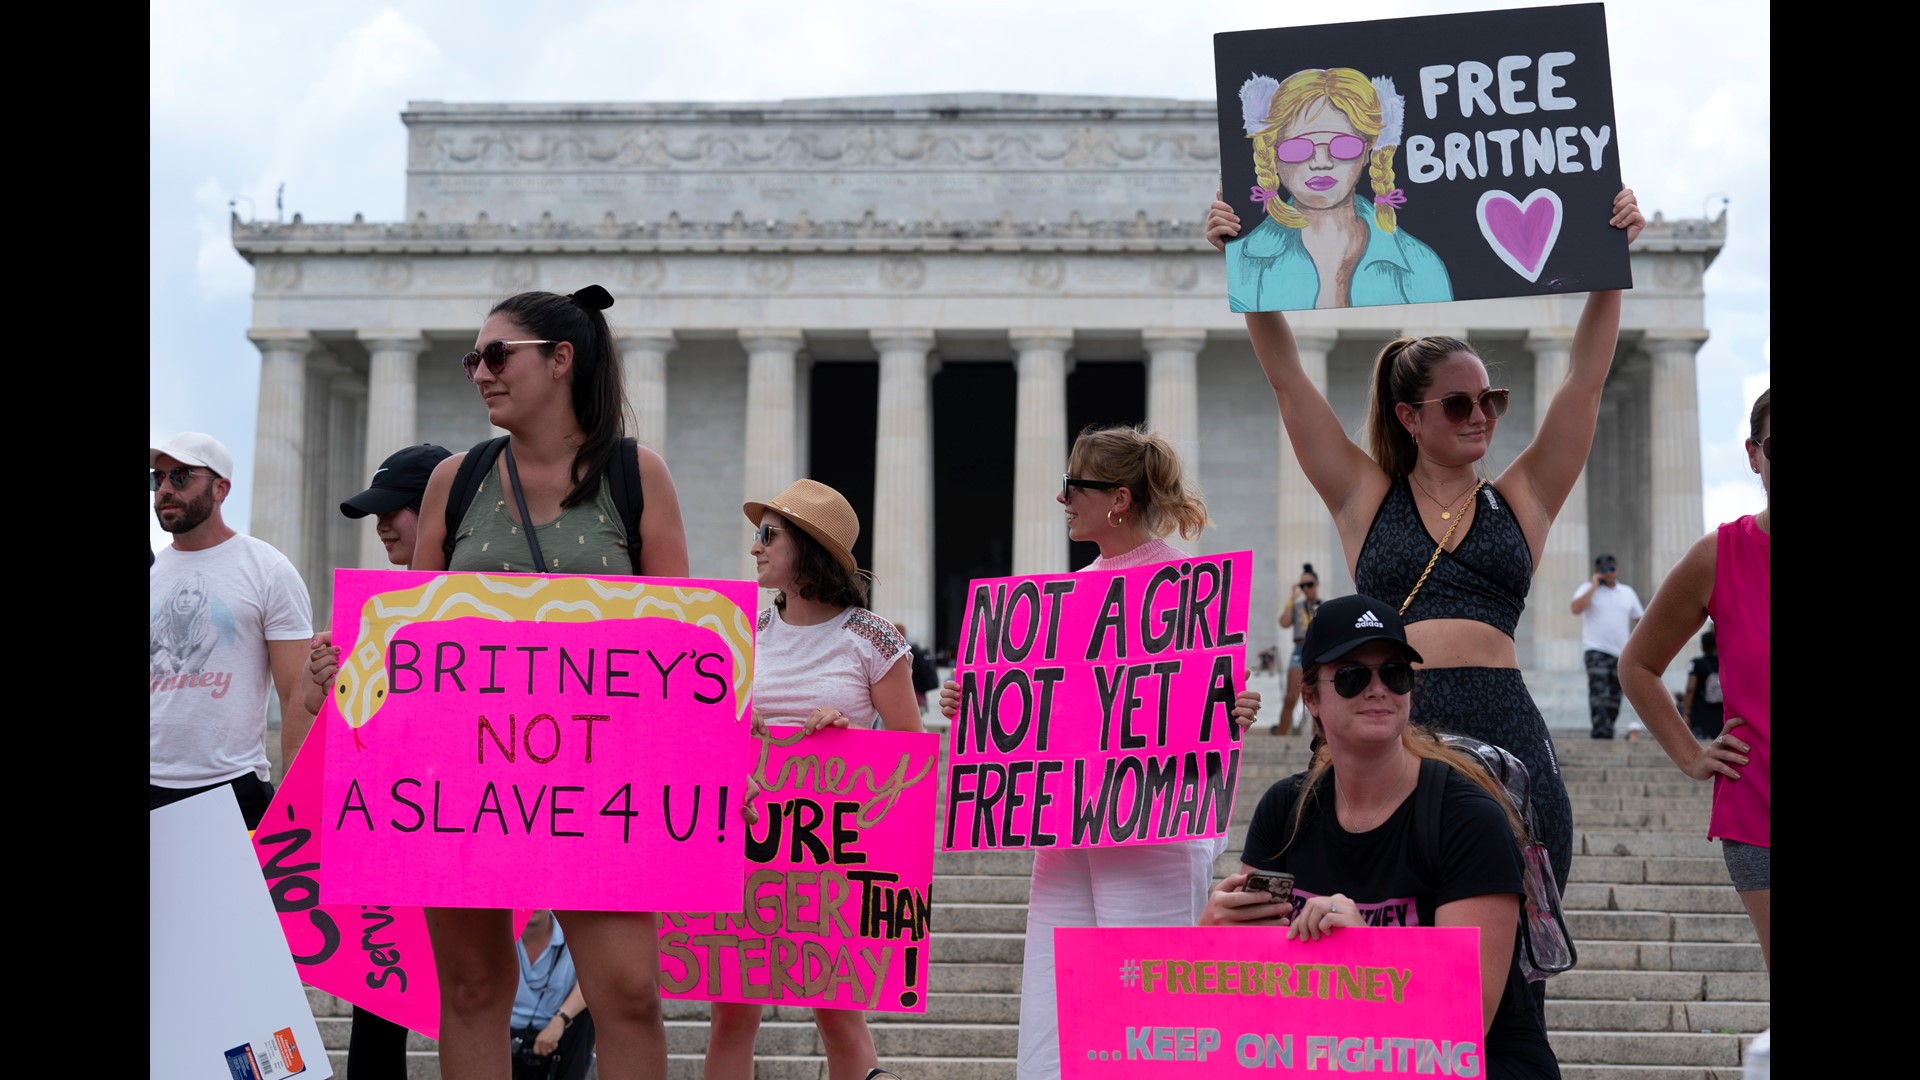 With all the talk on Britney Spears' court case, there's been a lot of questions about conservatorships and we're here to help explain.